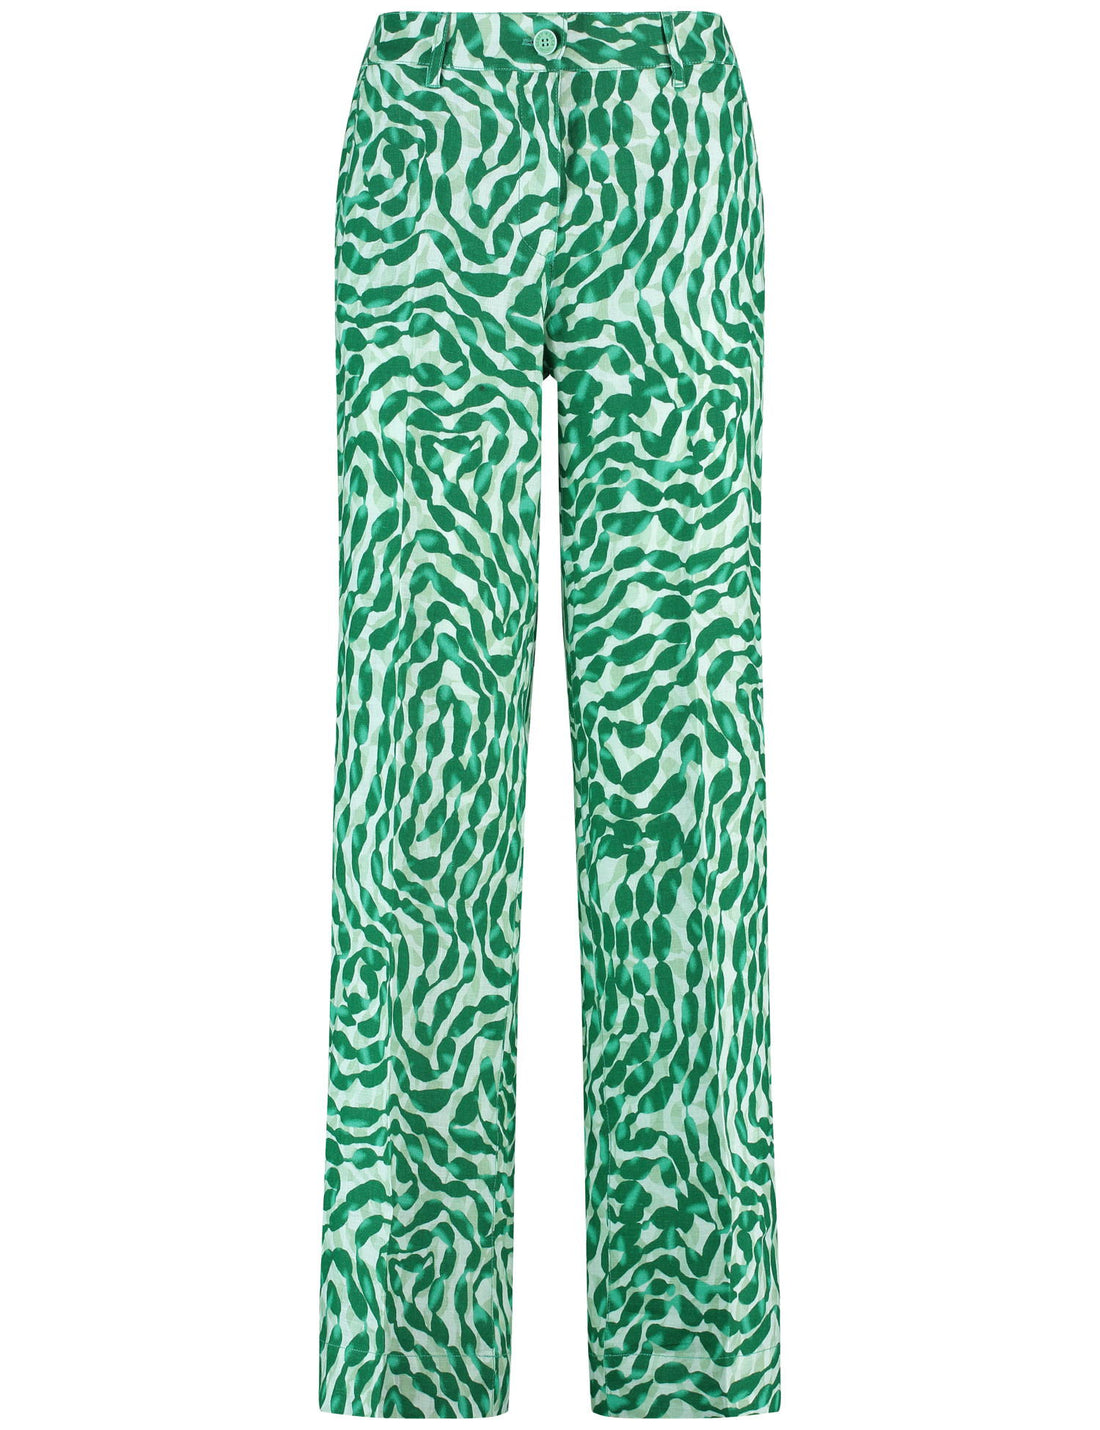 Patterned Linen Trousers With Pressed Pleats_222036-66224_5058_02